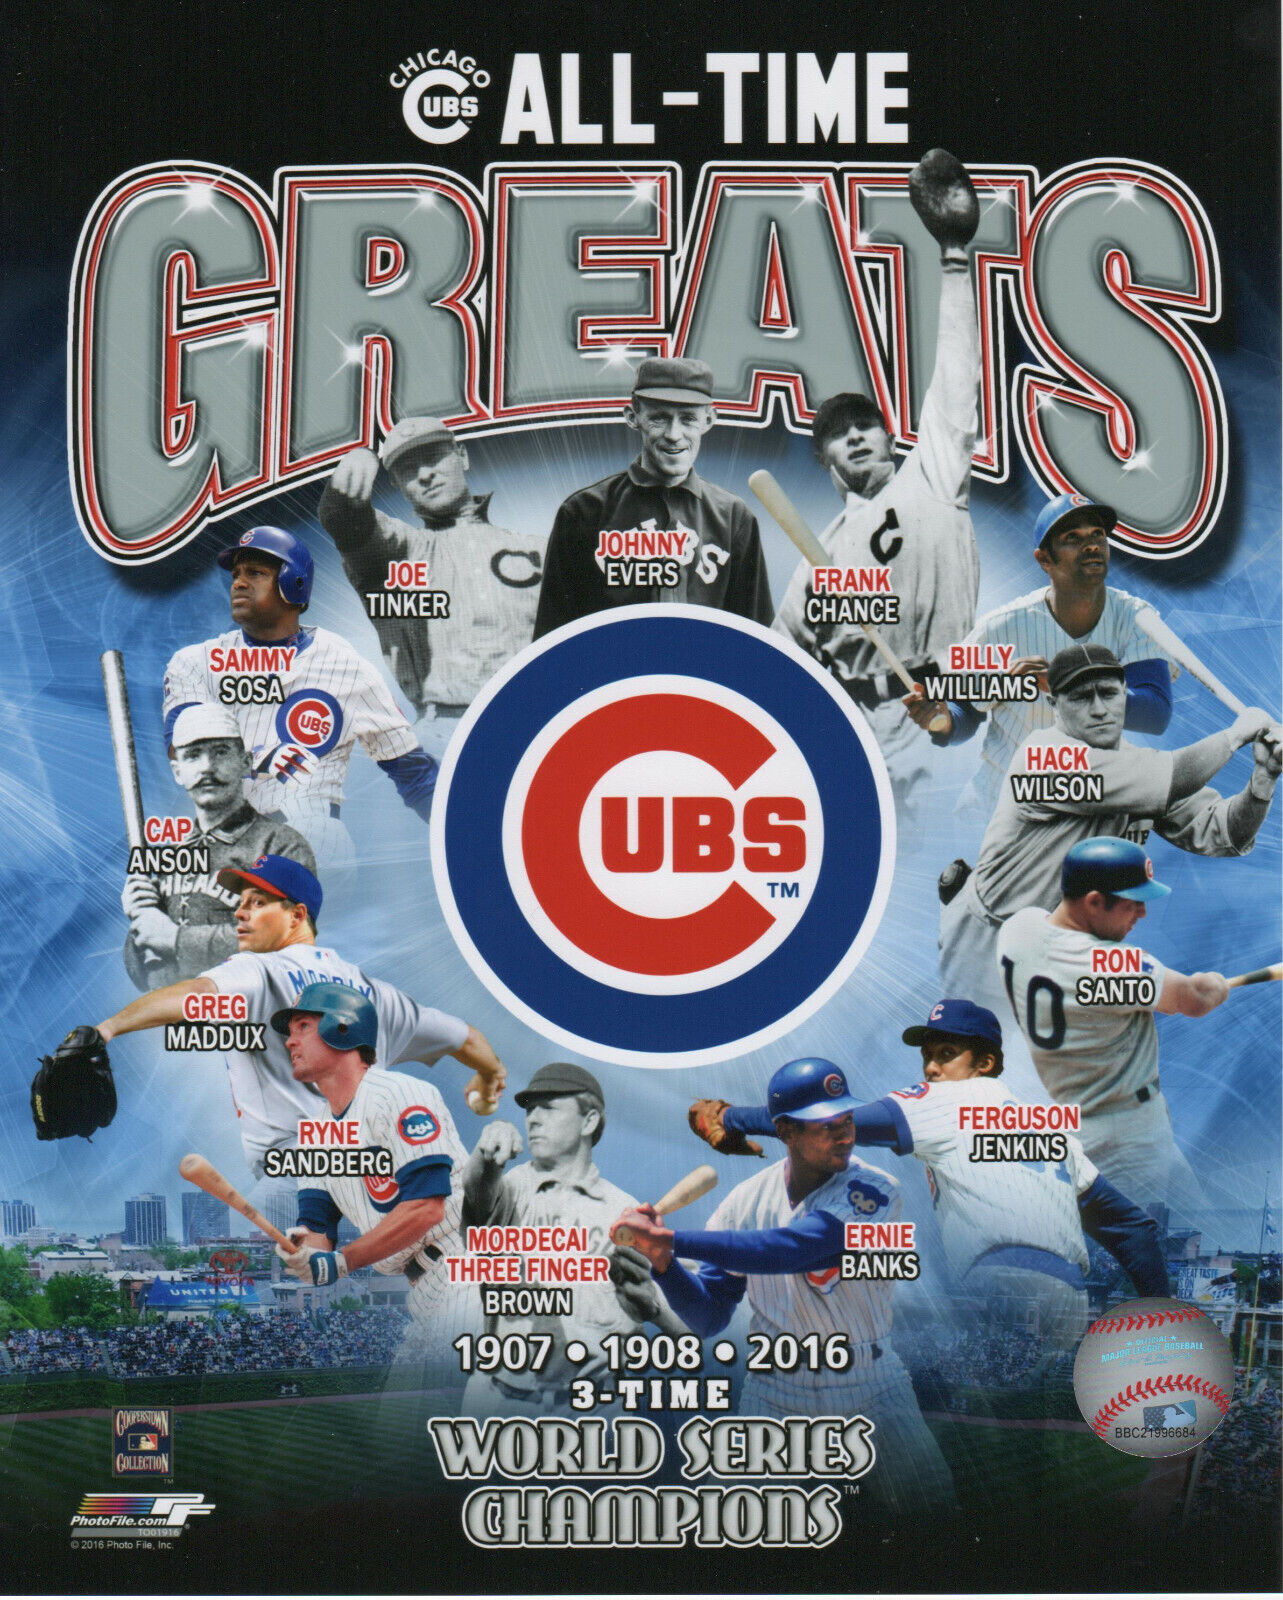 Chicago Cubs All-Time Greats LICENSED 8x10 Baseball Photo (With 2016)